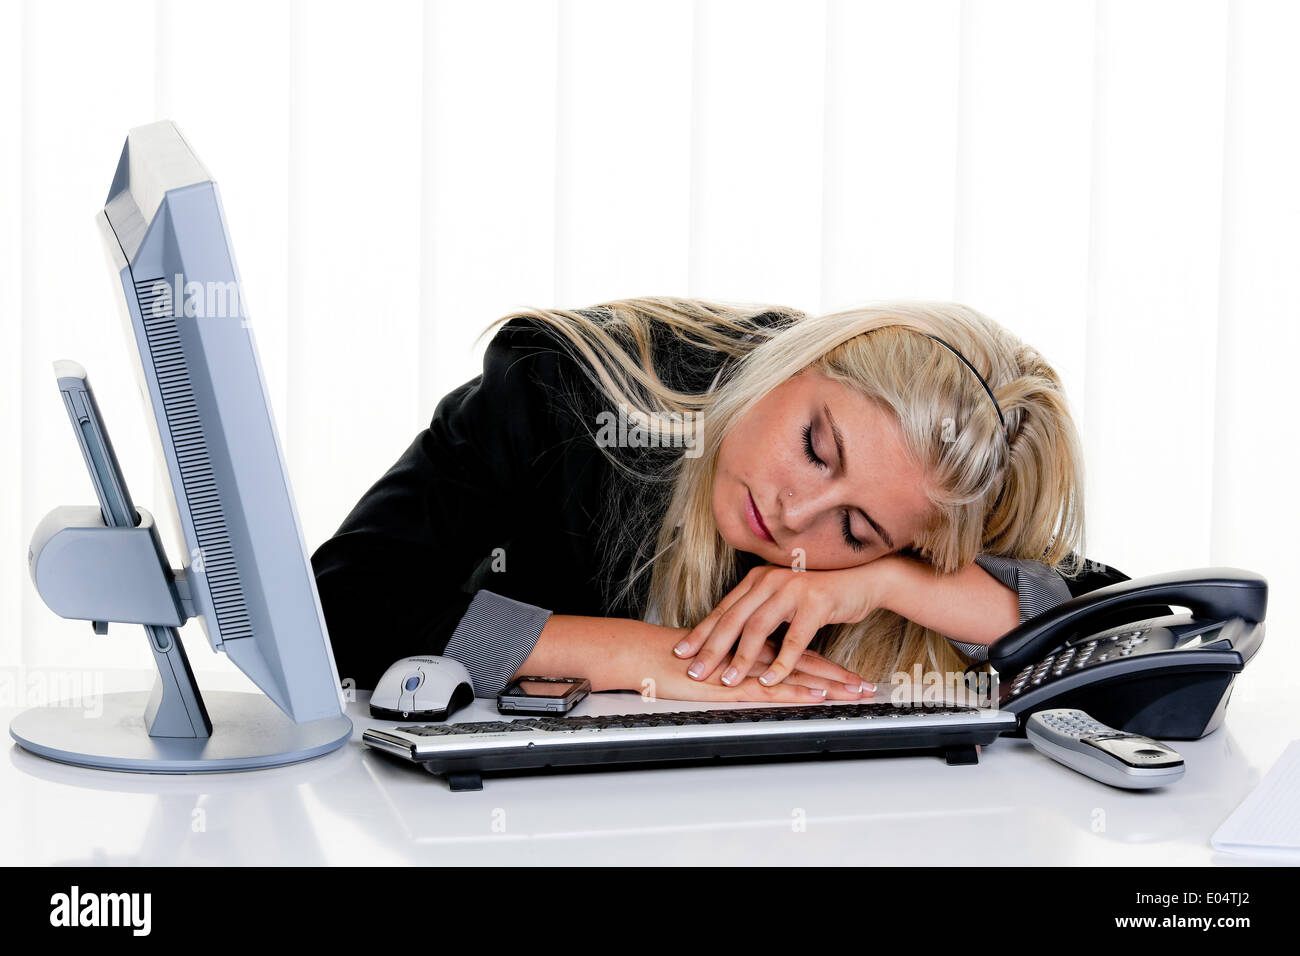 Young woman with of problem and put under stress in the office, Junge Frau mit Problemen und Stress im Buero Stock Photo